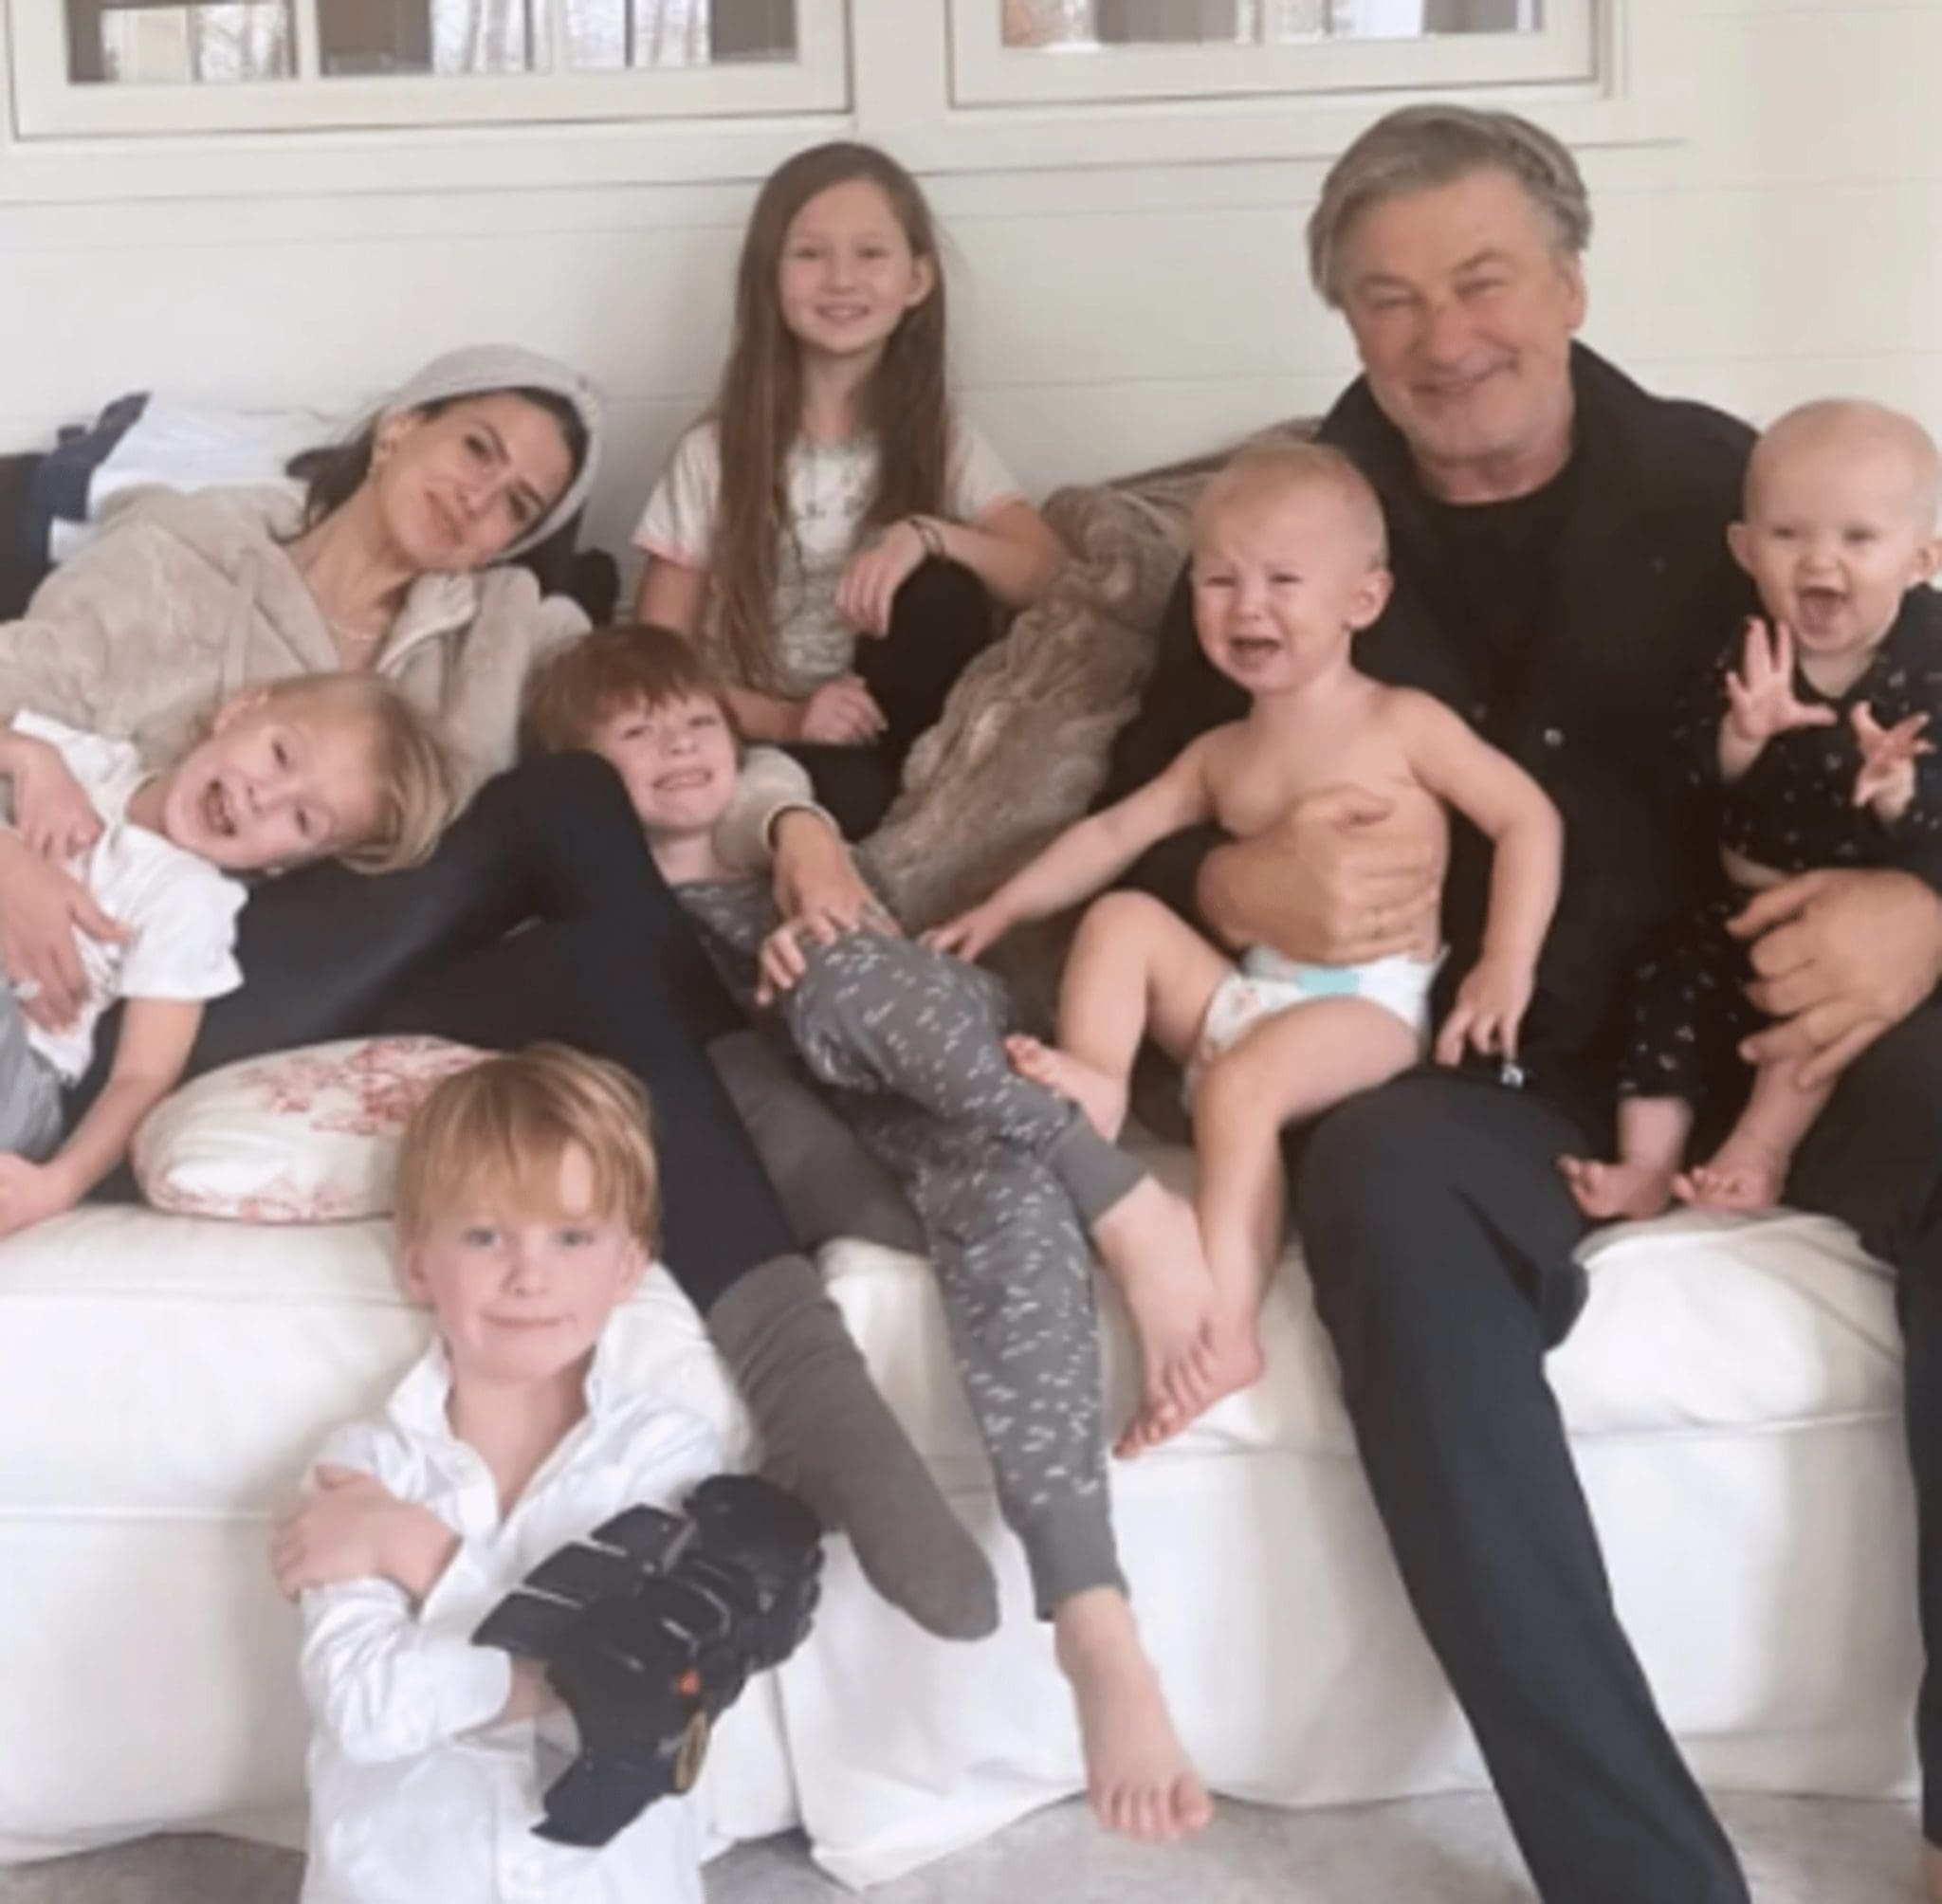 Hilaria Baldwin has said that she and Alec will have to wait and see whether they decide to expand their family.